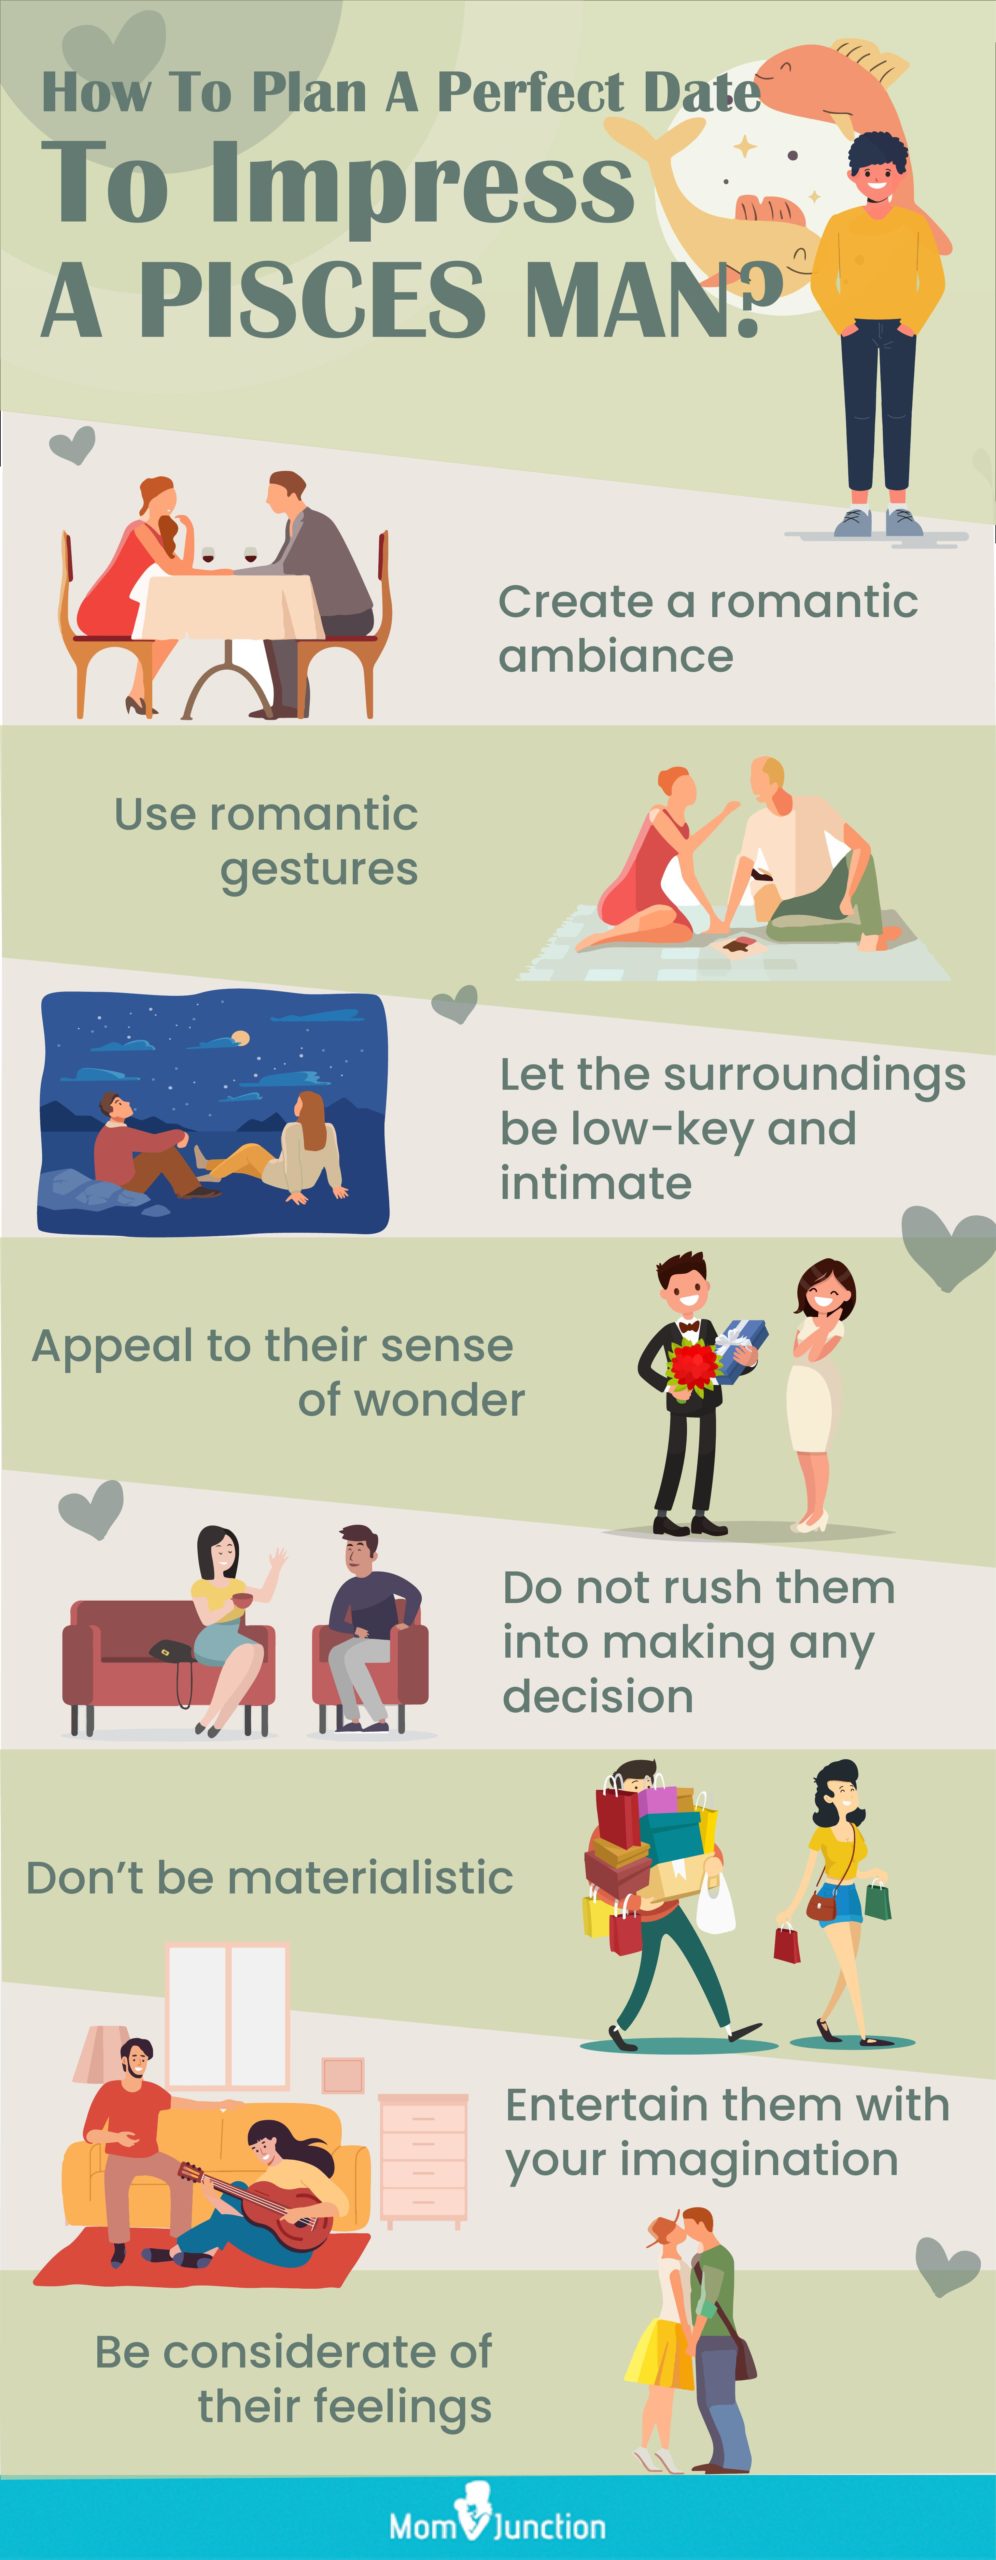 how to impress a pisces man (infographic)